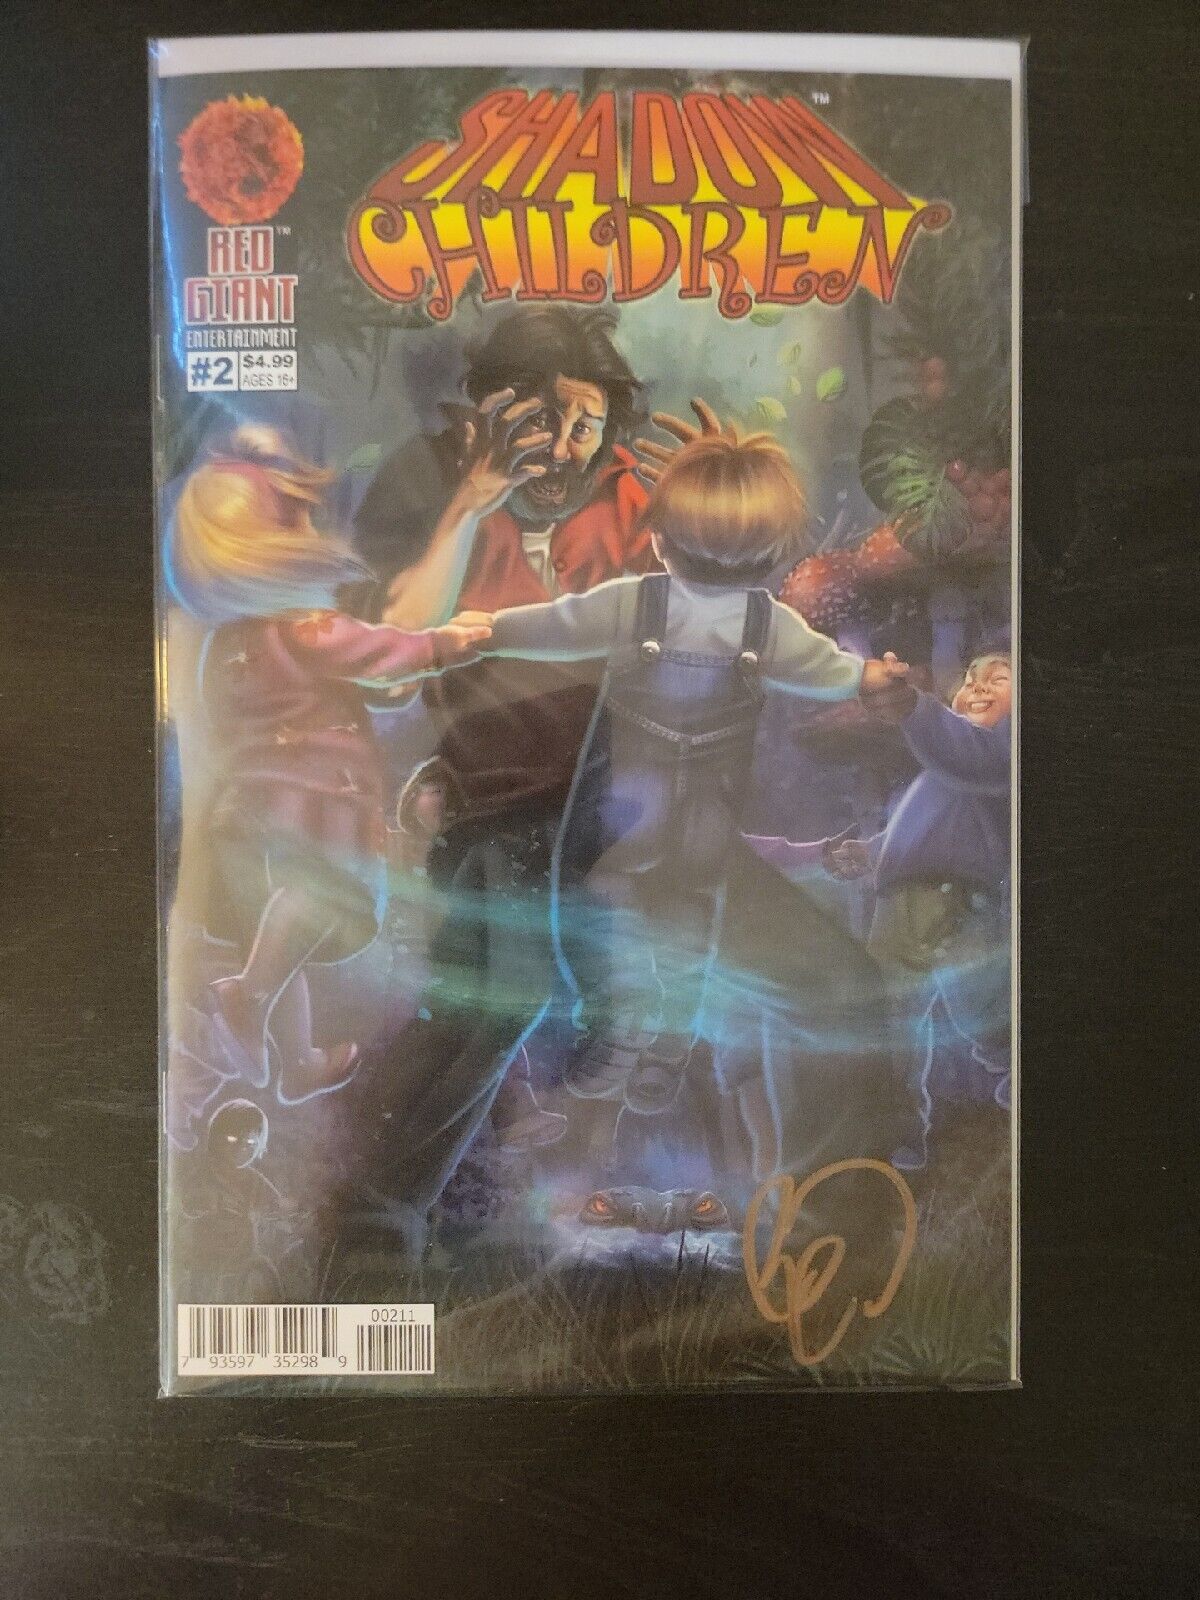 Shadow Children #2 Comic Book 2021 - Red Giant COA Included Benny Powell